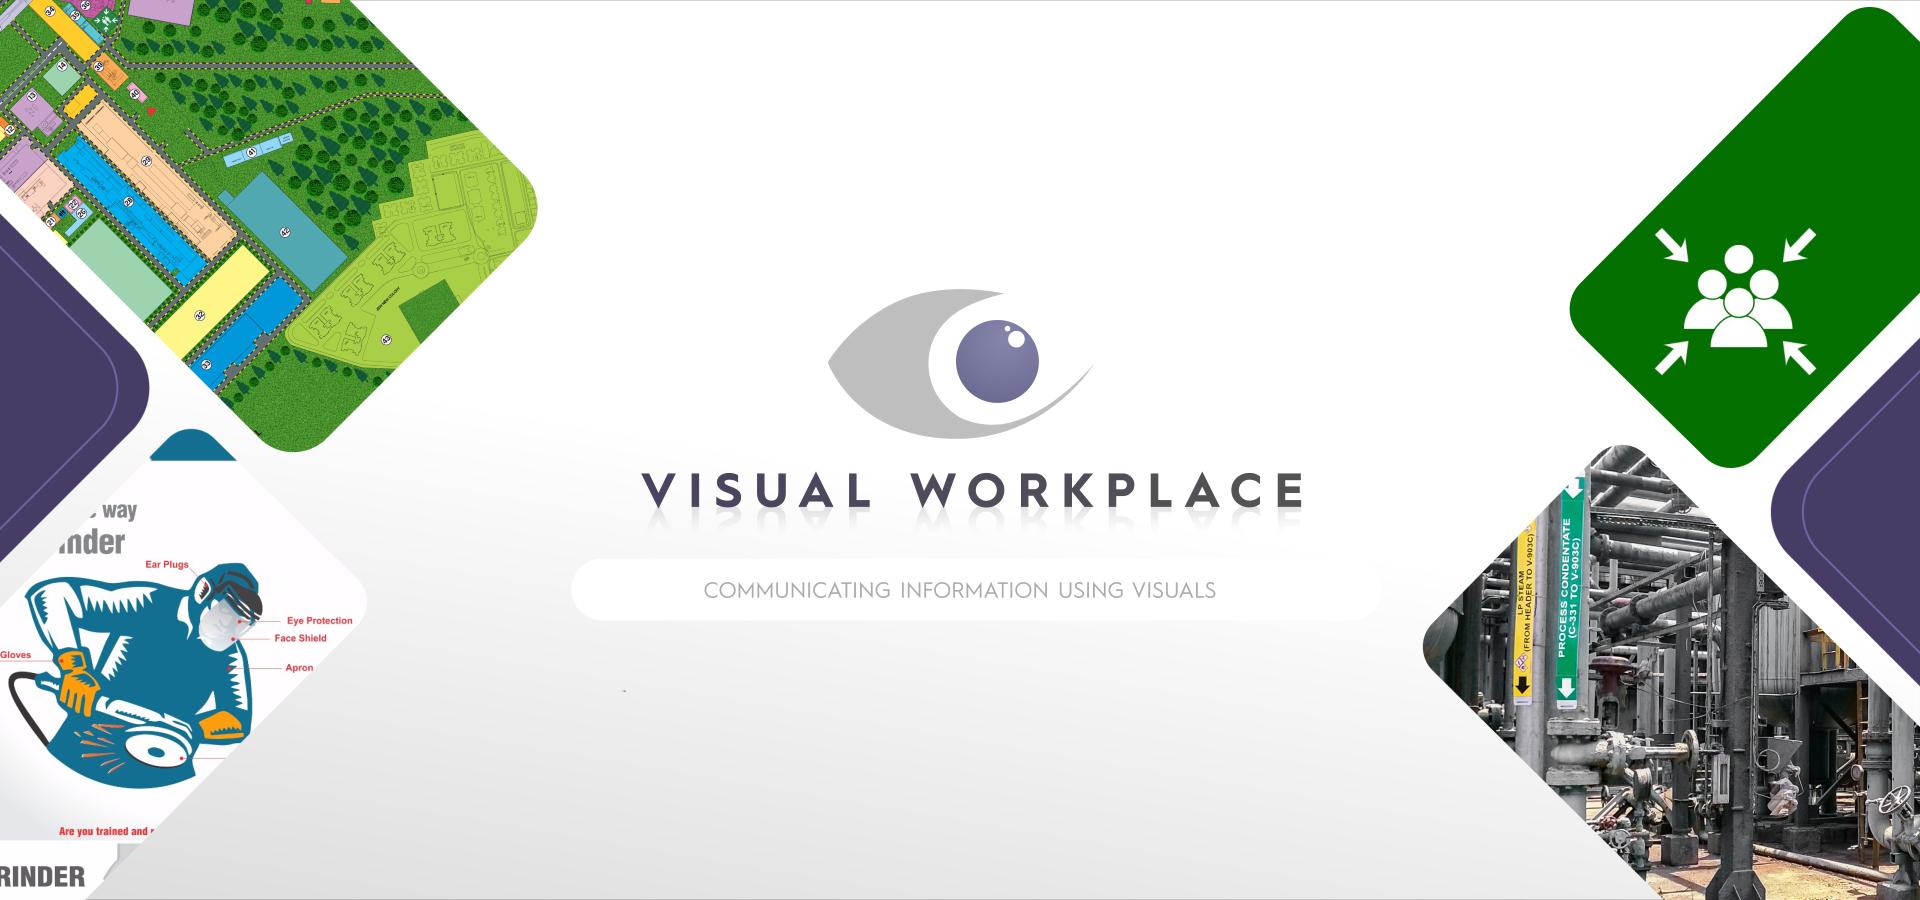 Visual workplace banner, communicating information using visuals